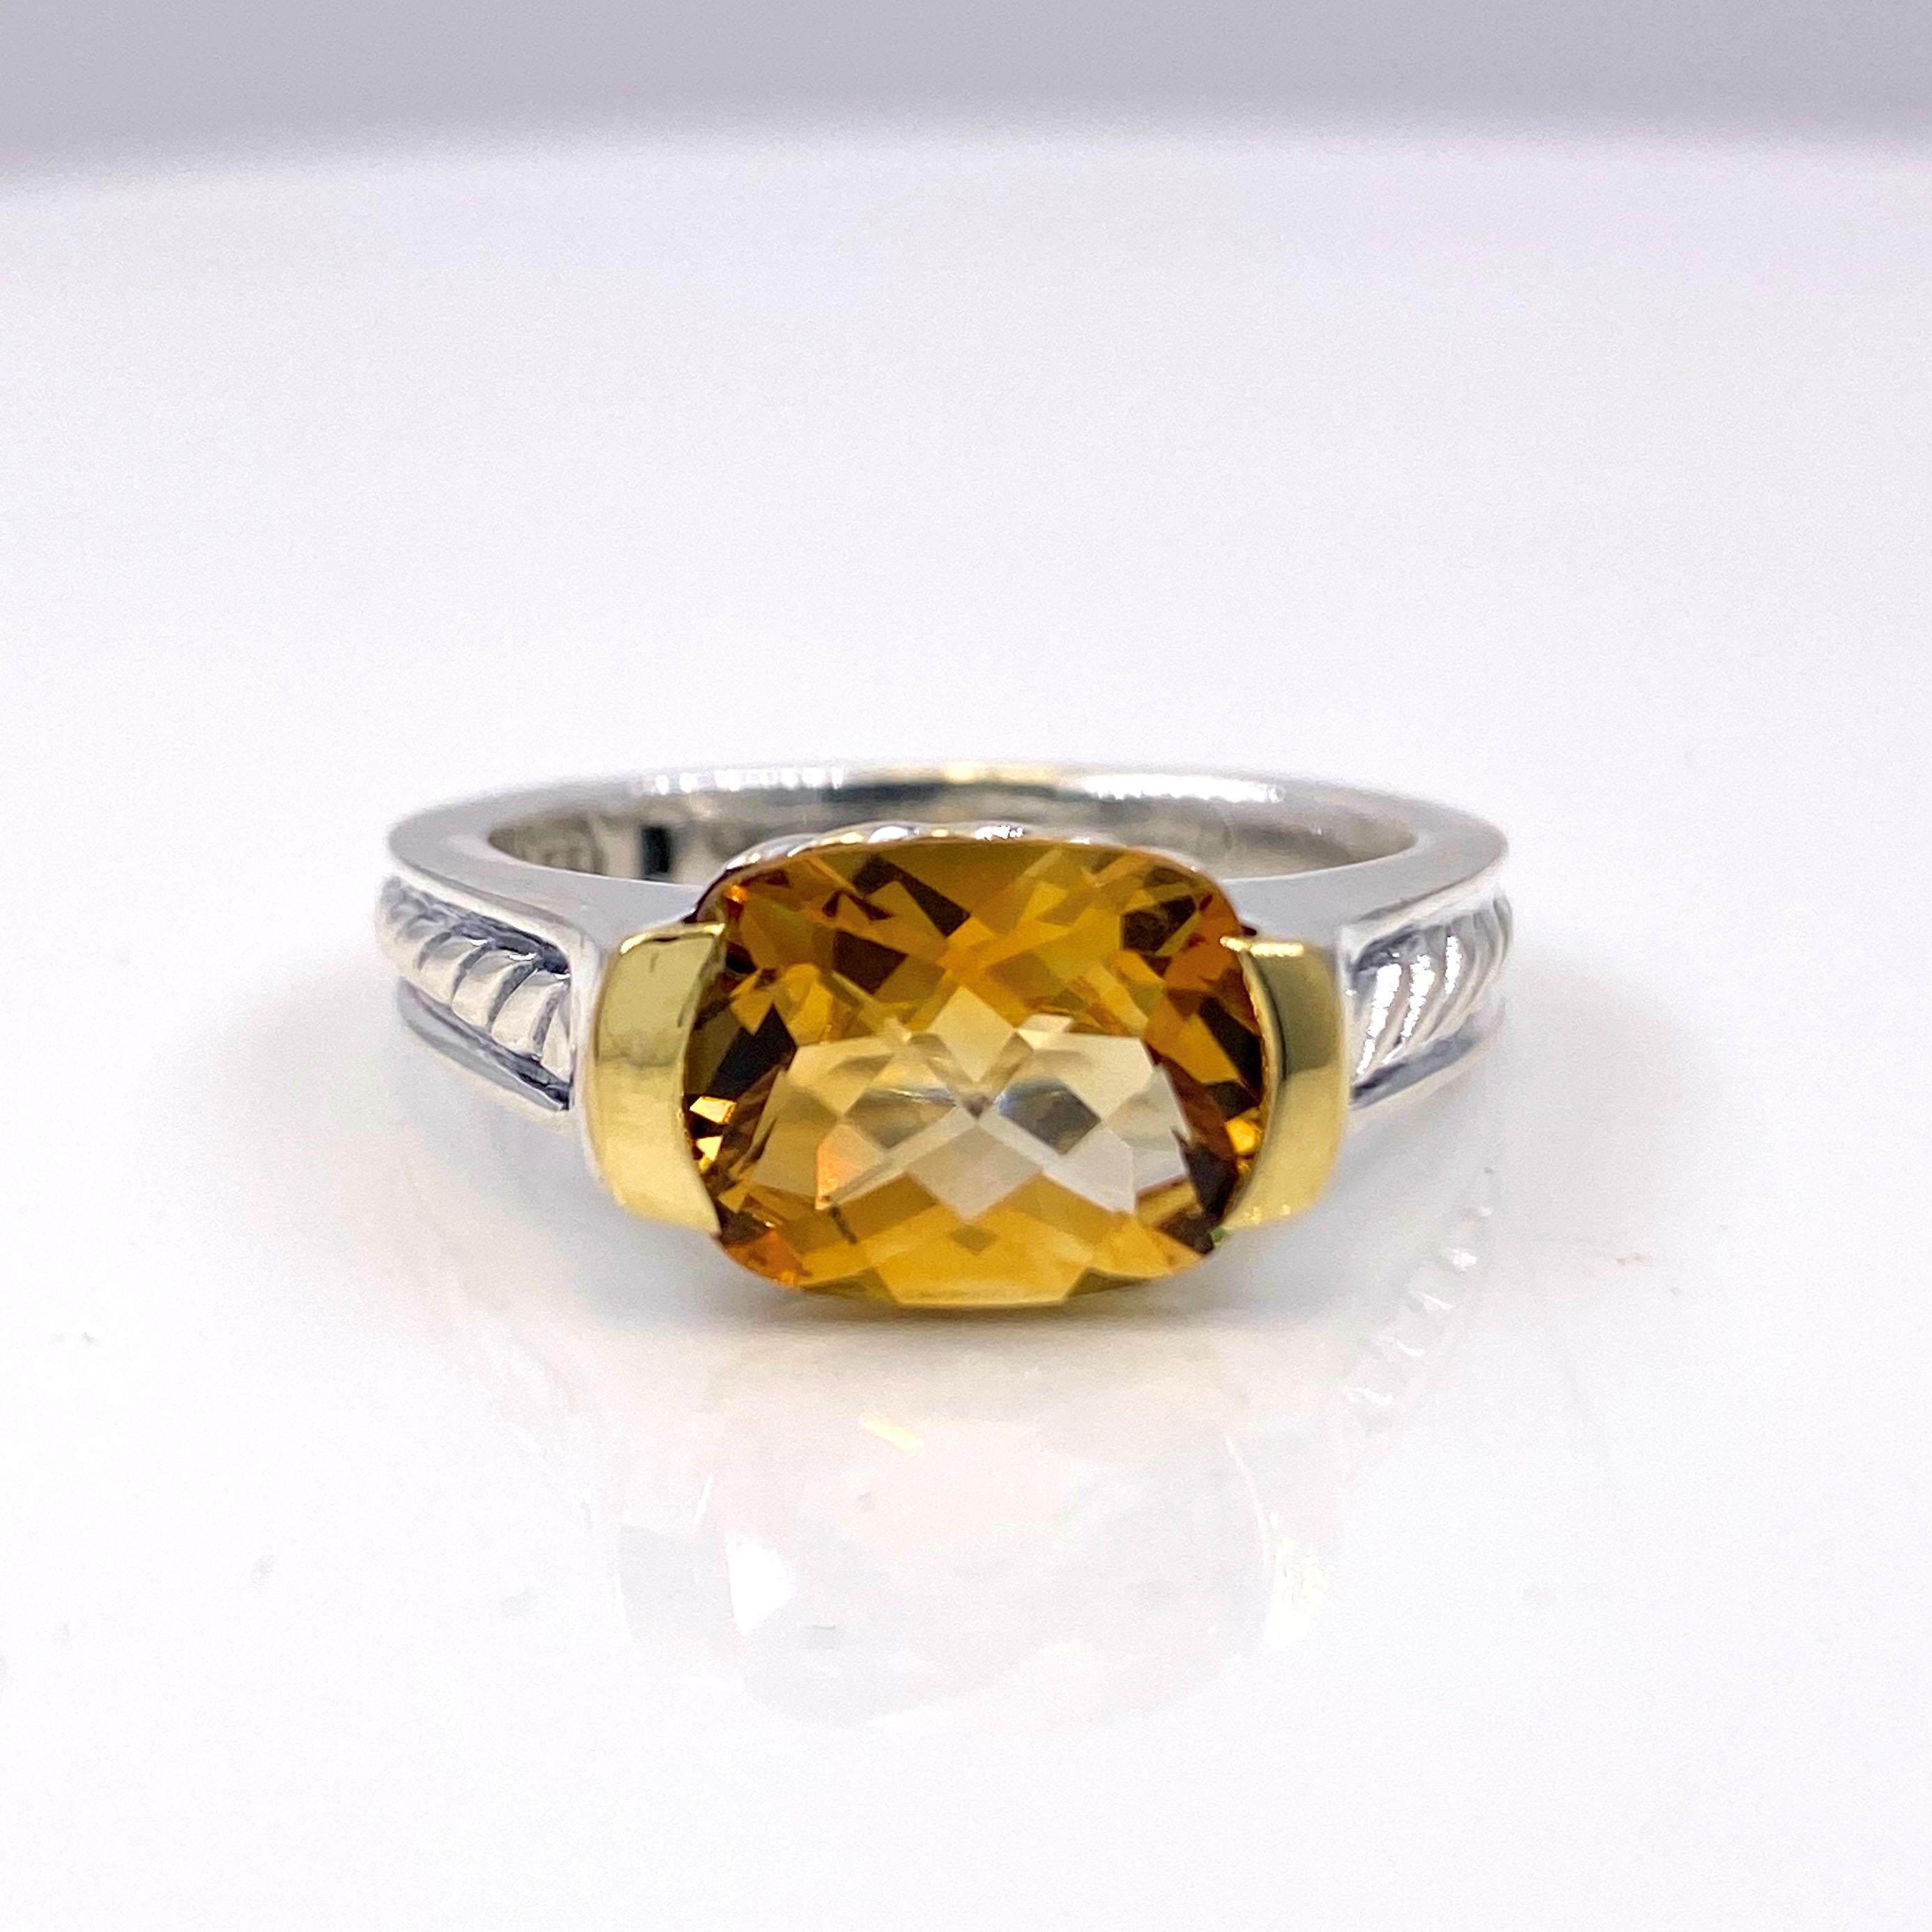 David Yurman Faceted Citrine Ring 18 Karat Yellow Gold and Sterling Silver 4